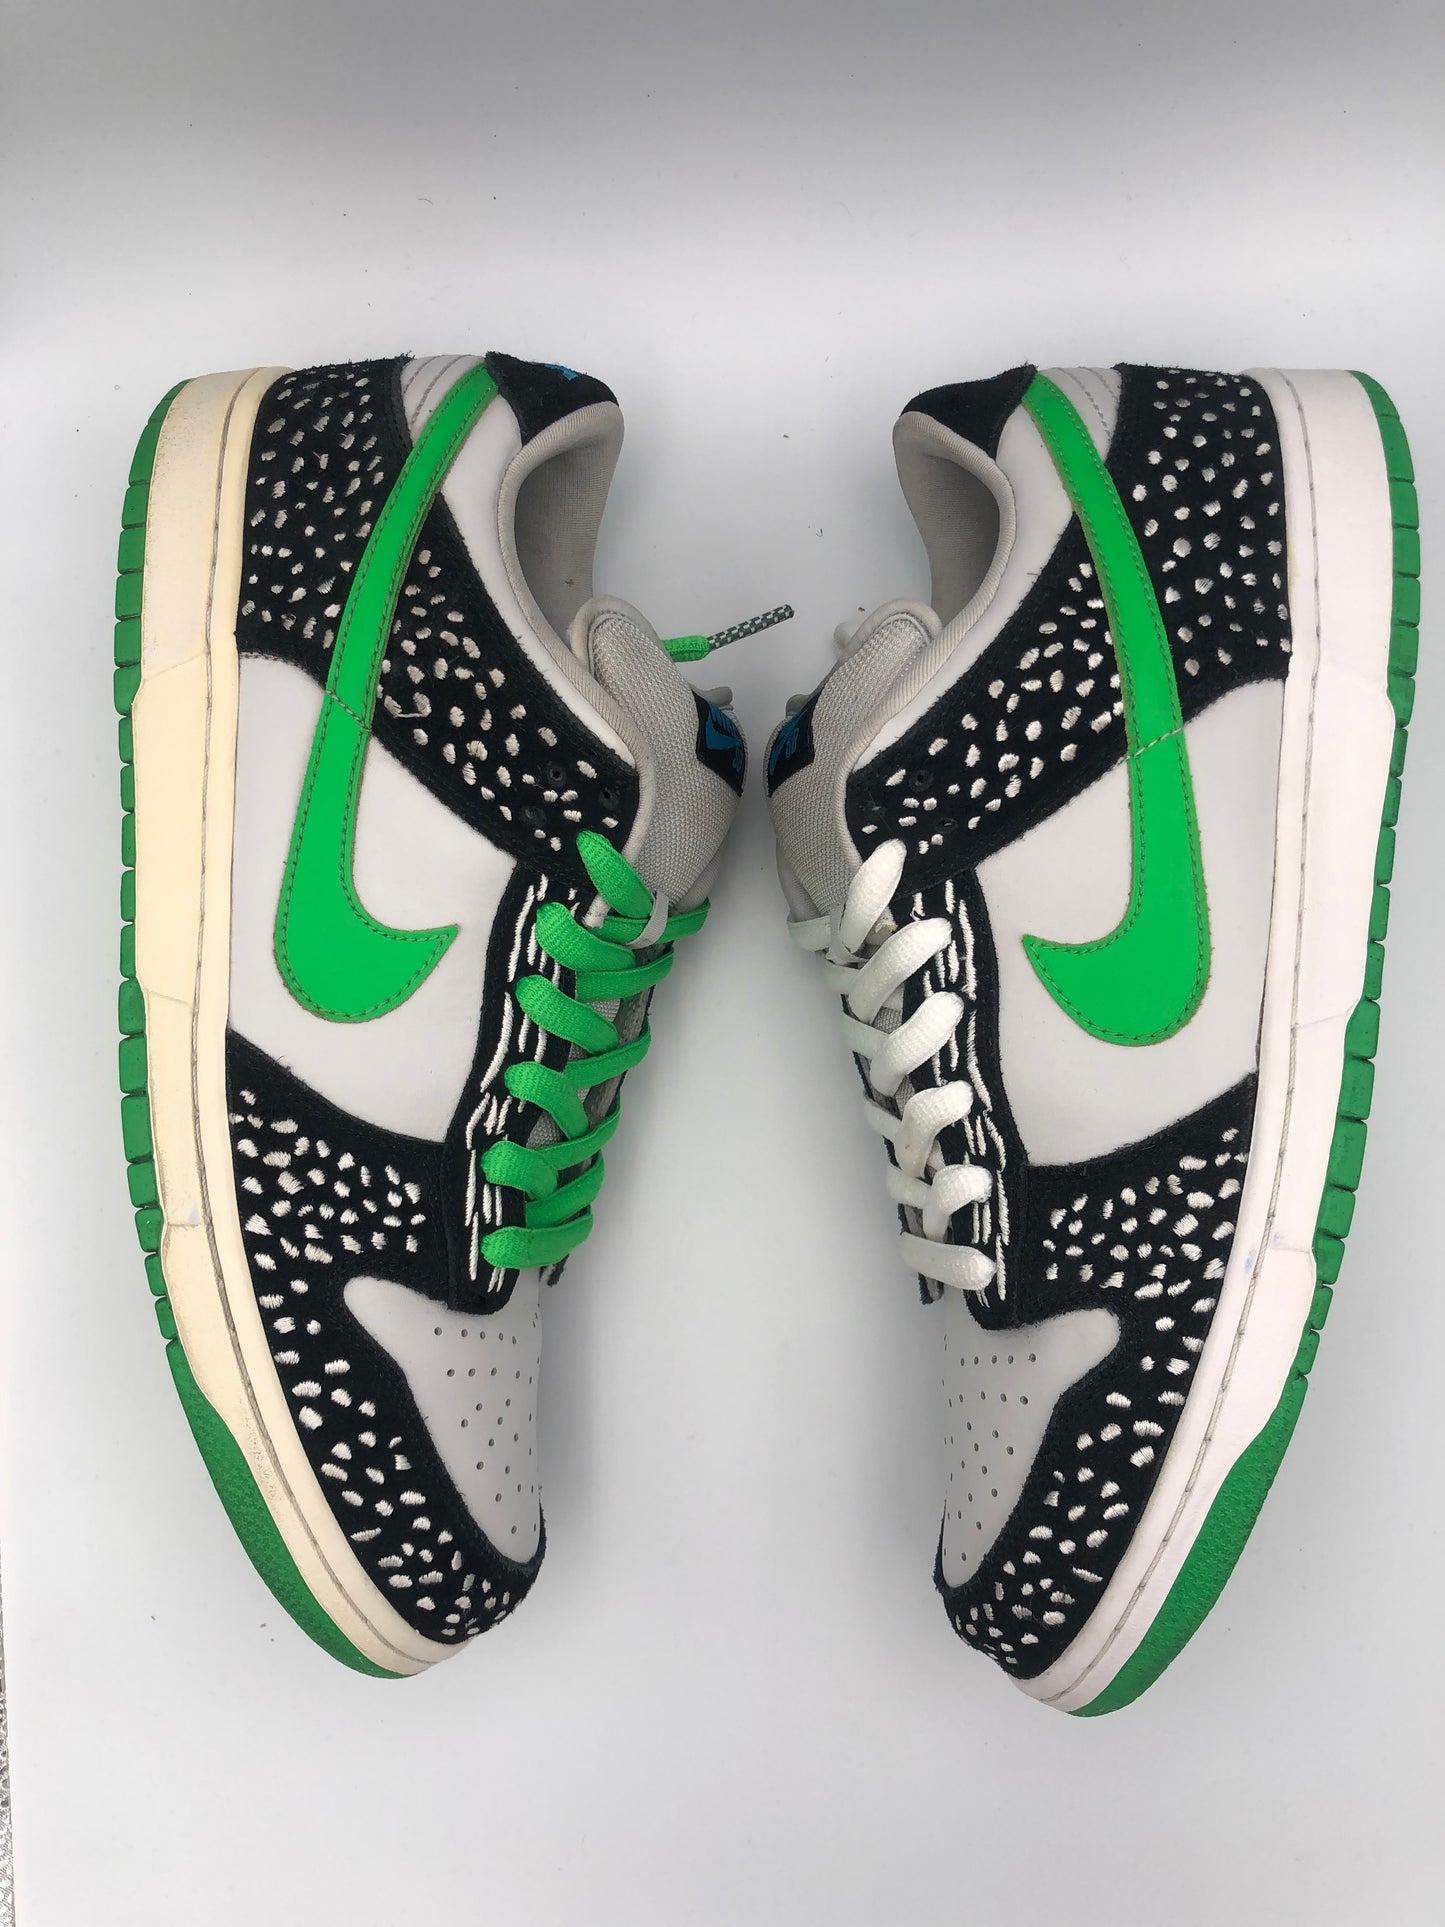 SB DUNK LOW 'LOON' SIZE 12